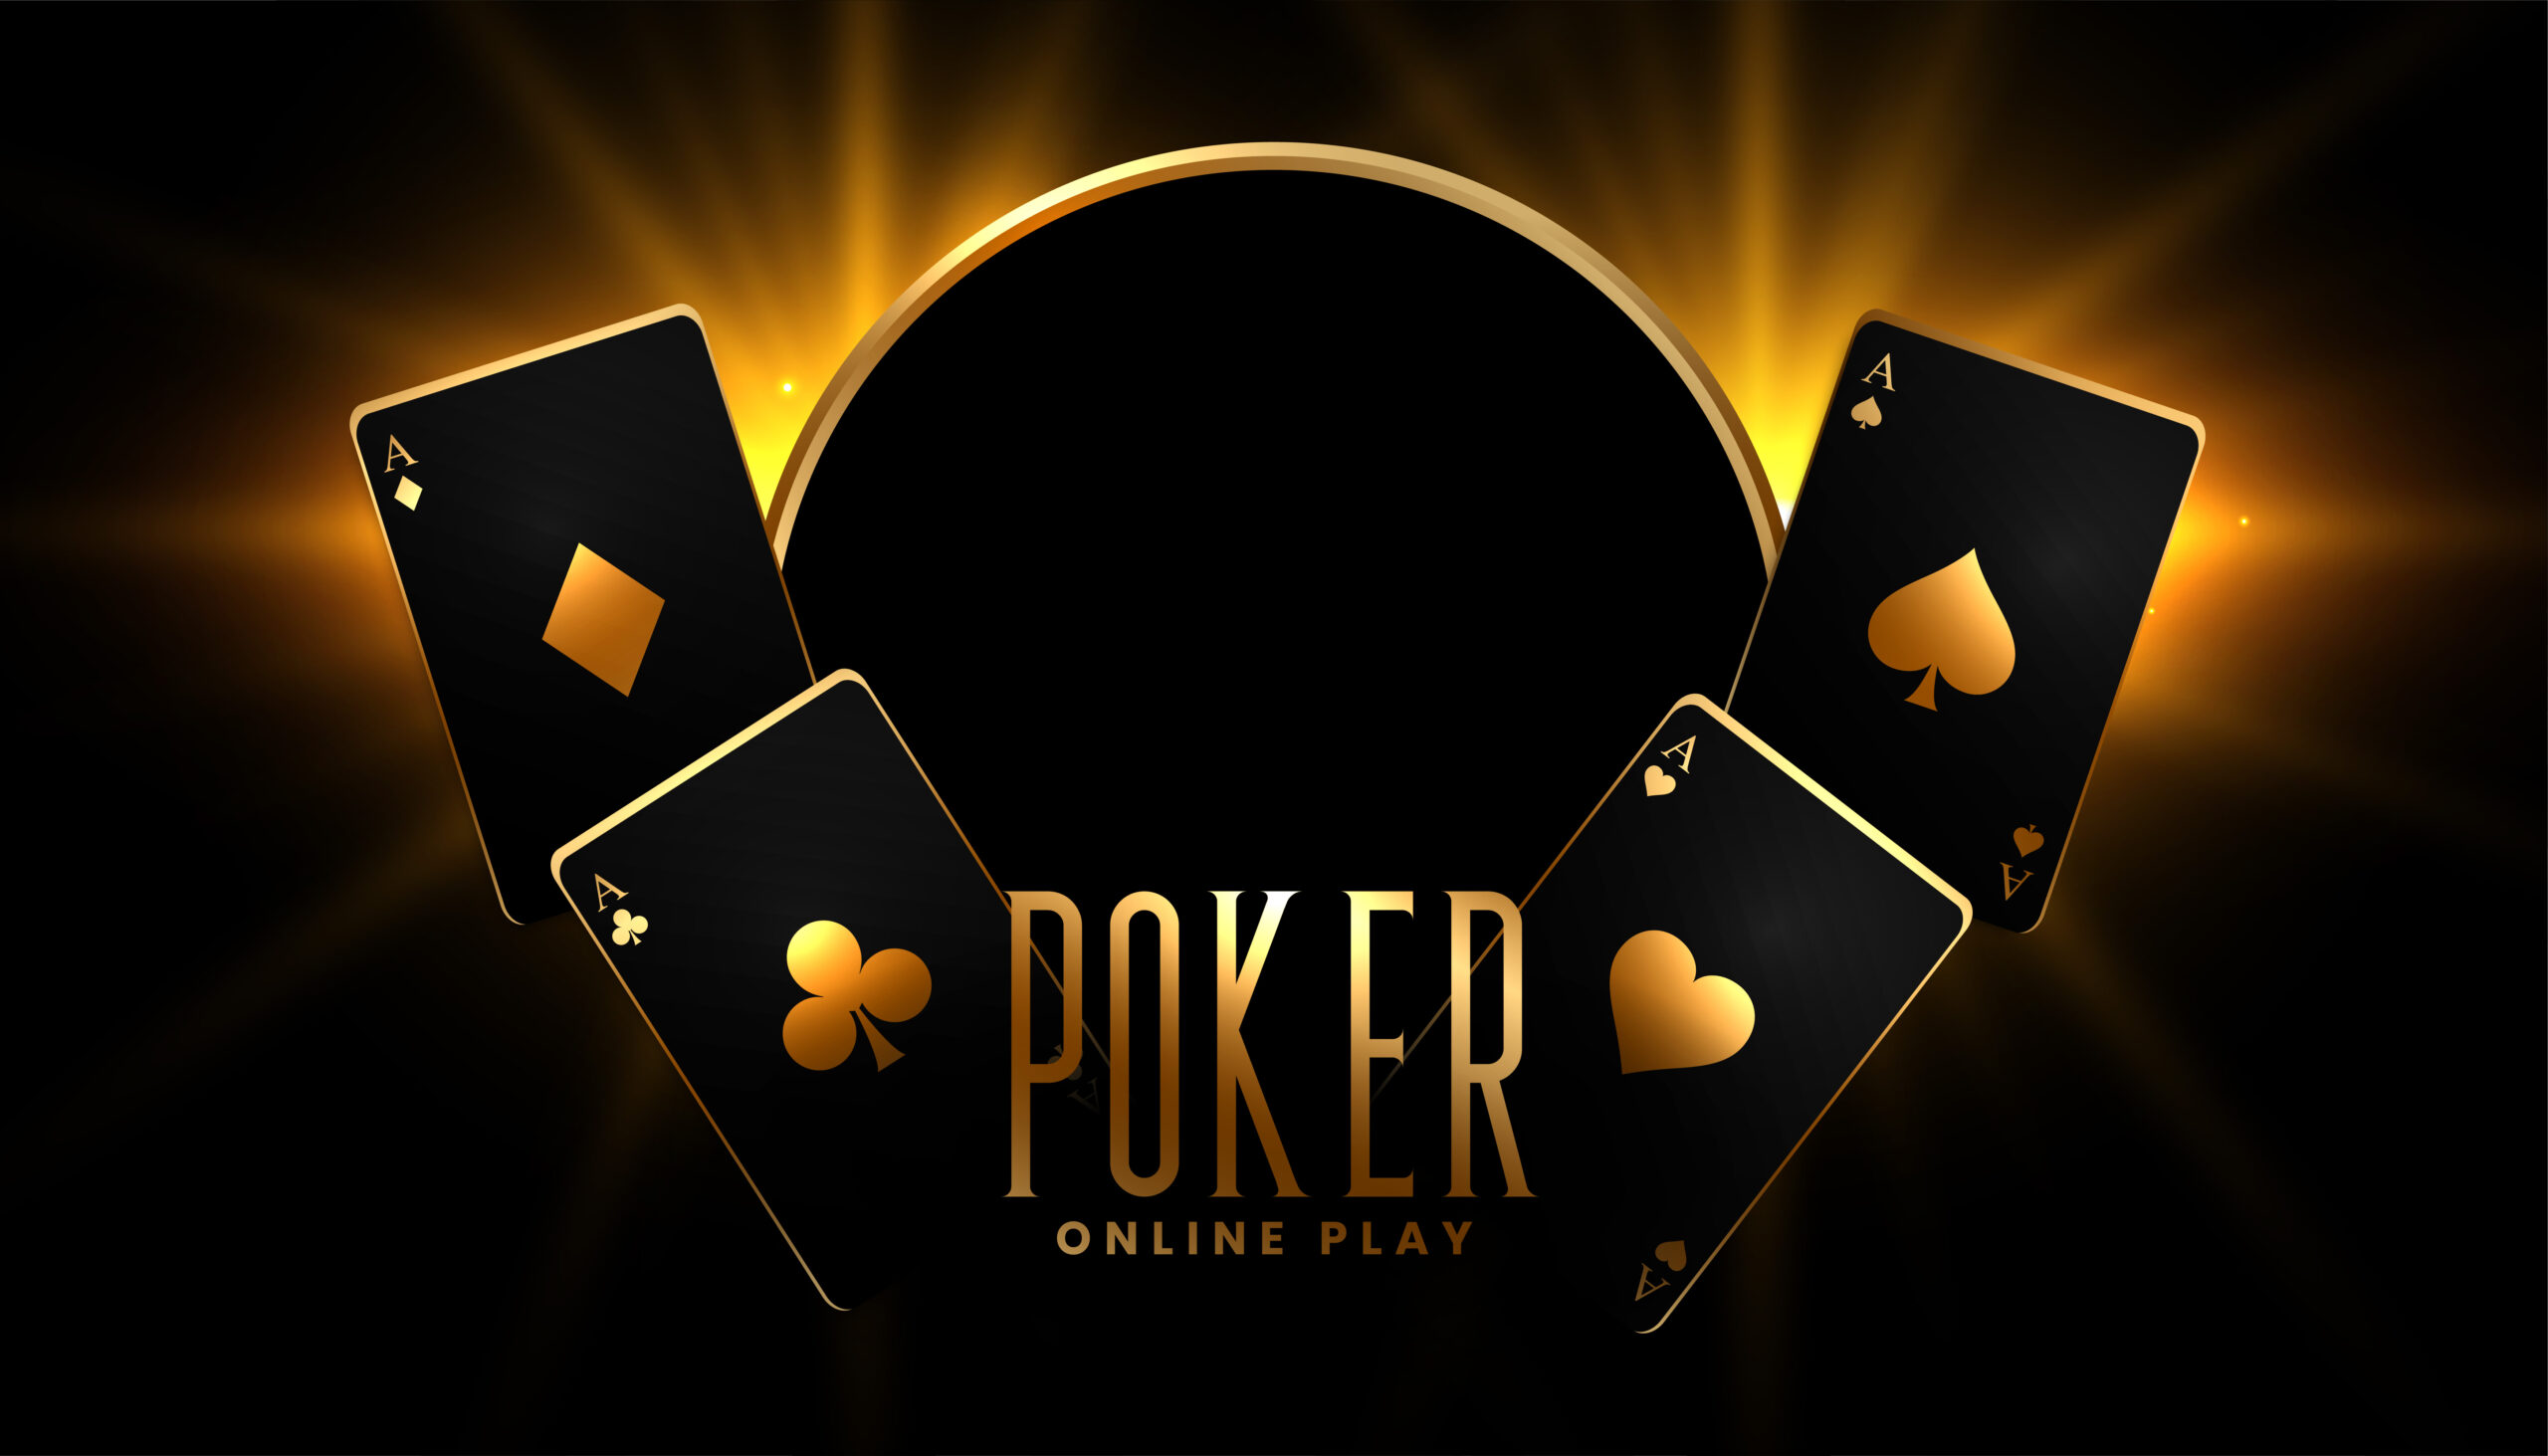 The Do’s and Don’ts of Playing Online Poker From Your Mobile Device